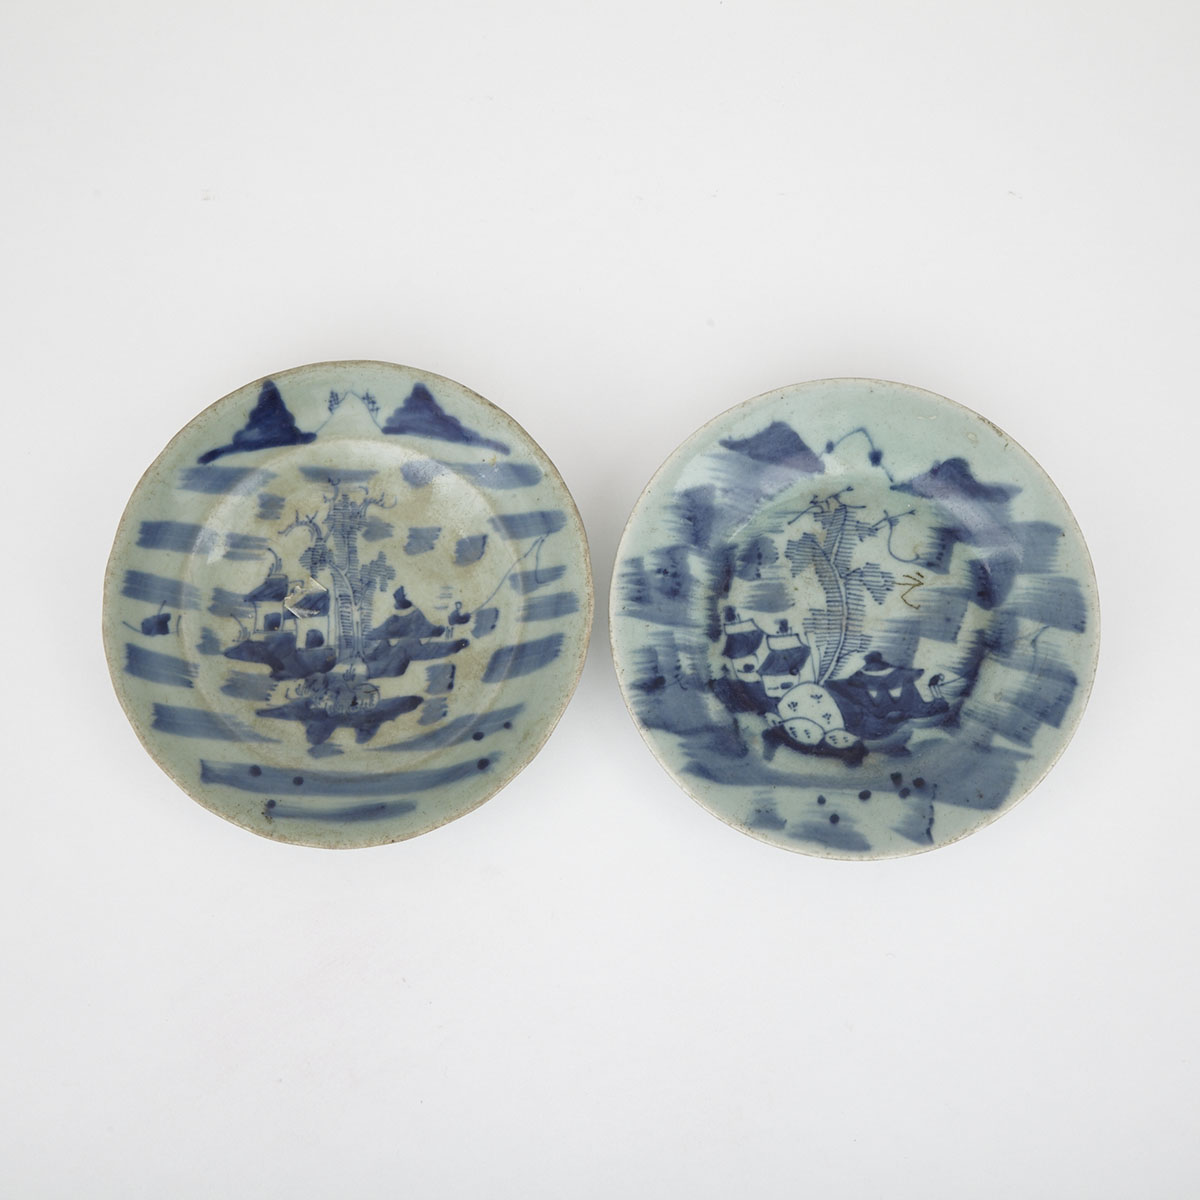 Two Chinese Export Celadon Plates, 19th Century